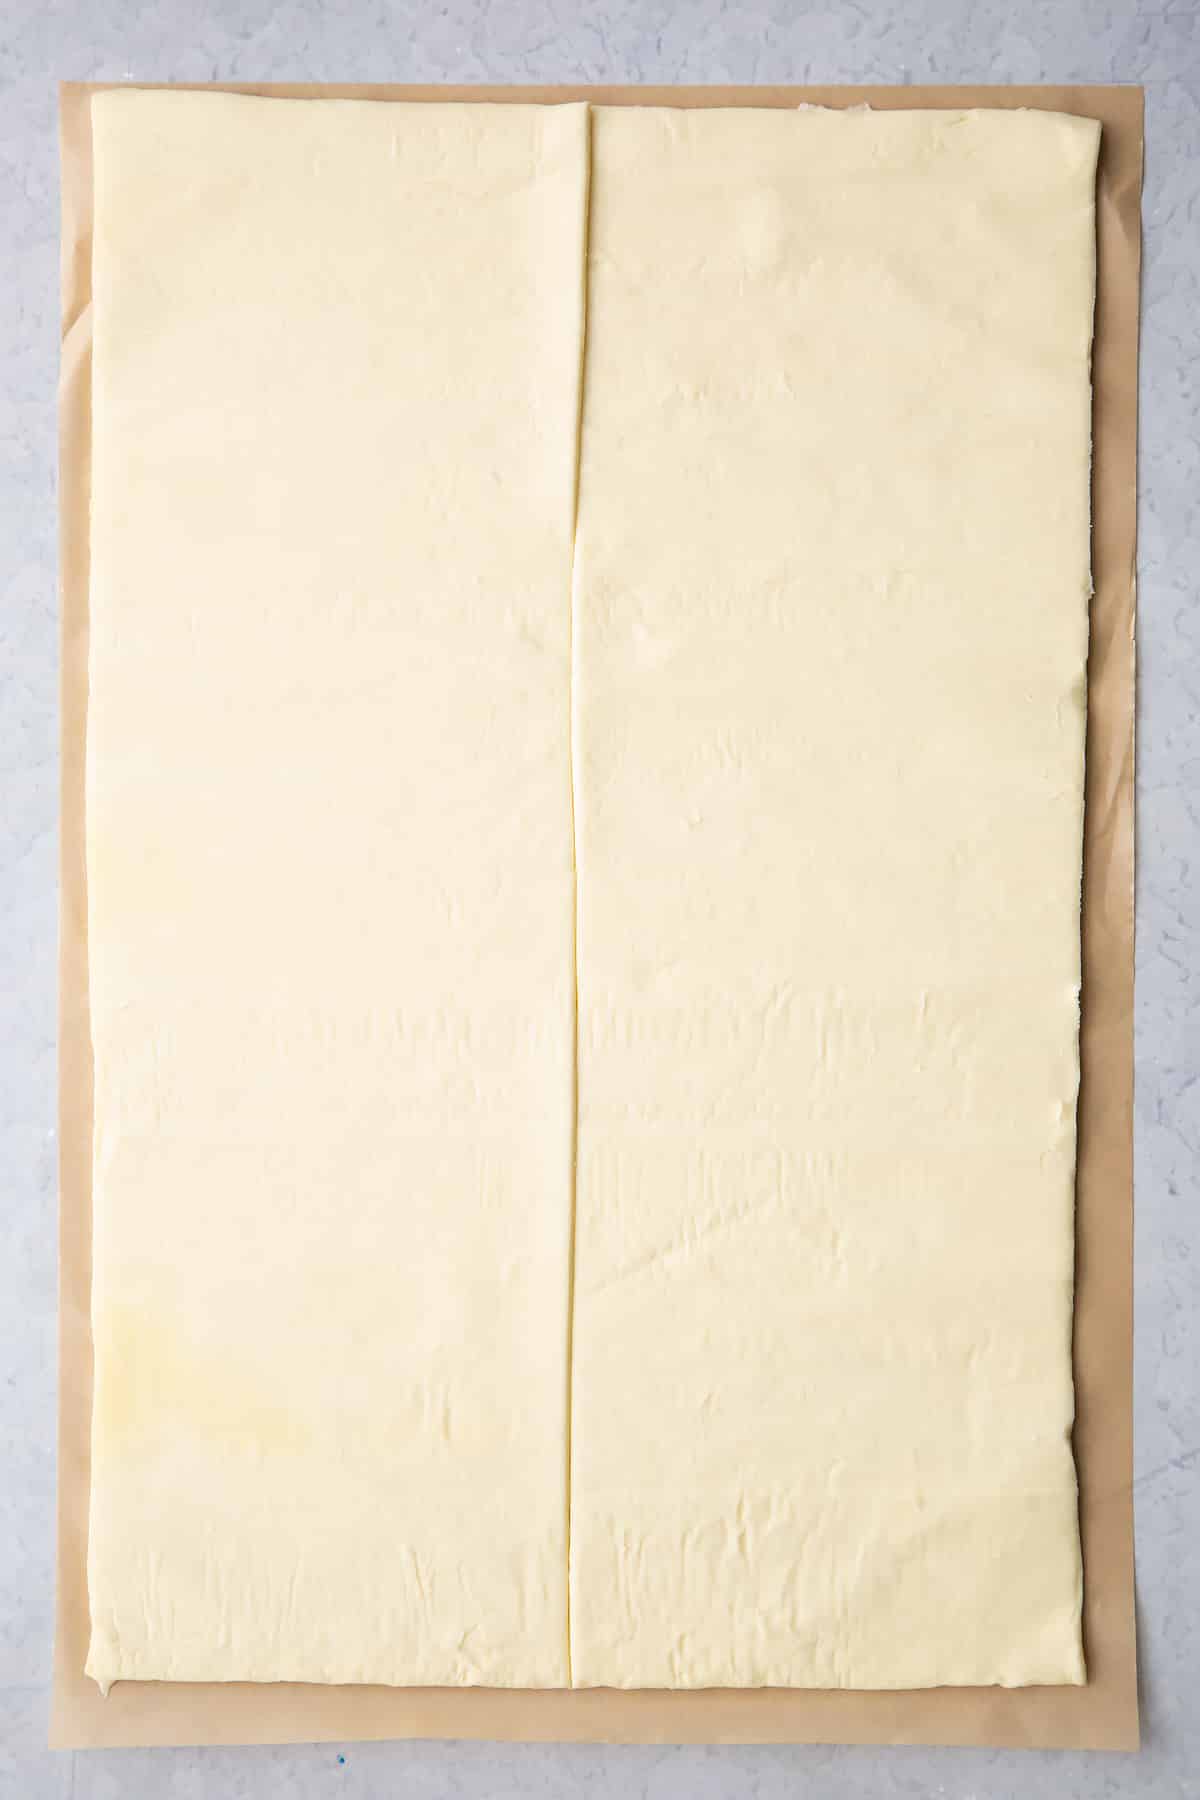 A sheet of puff pastry cut in half lengthways.